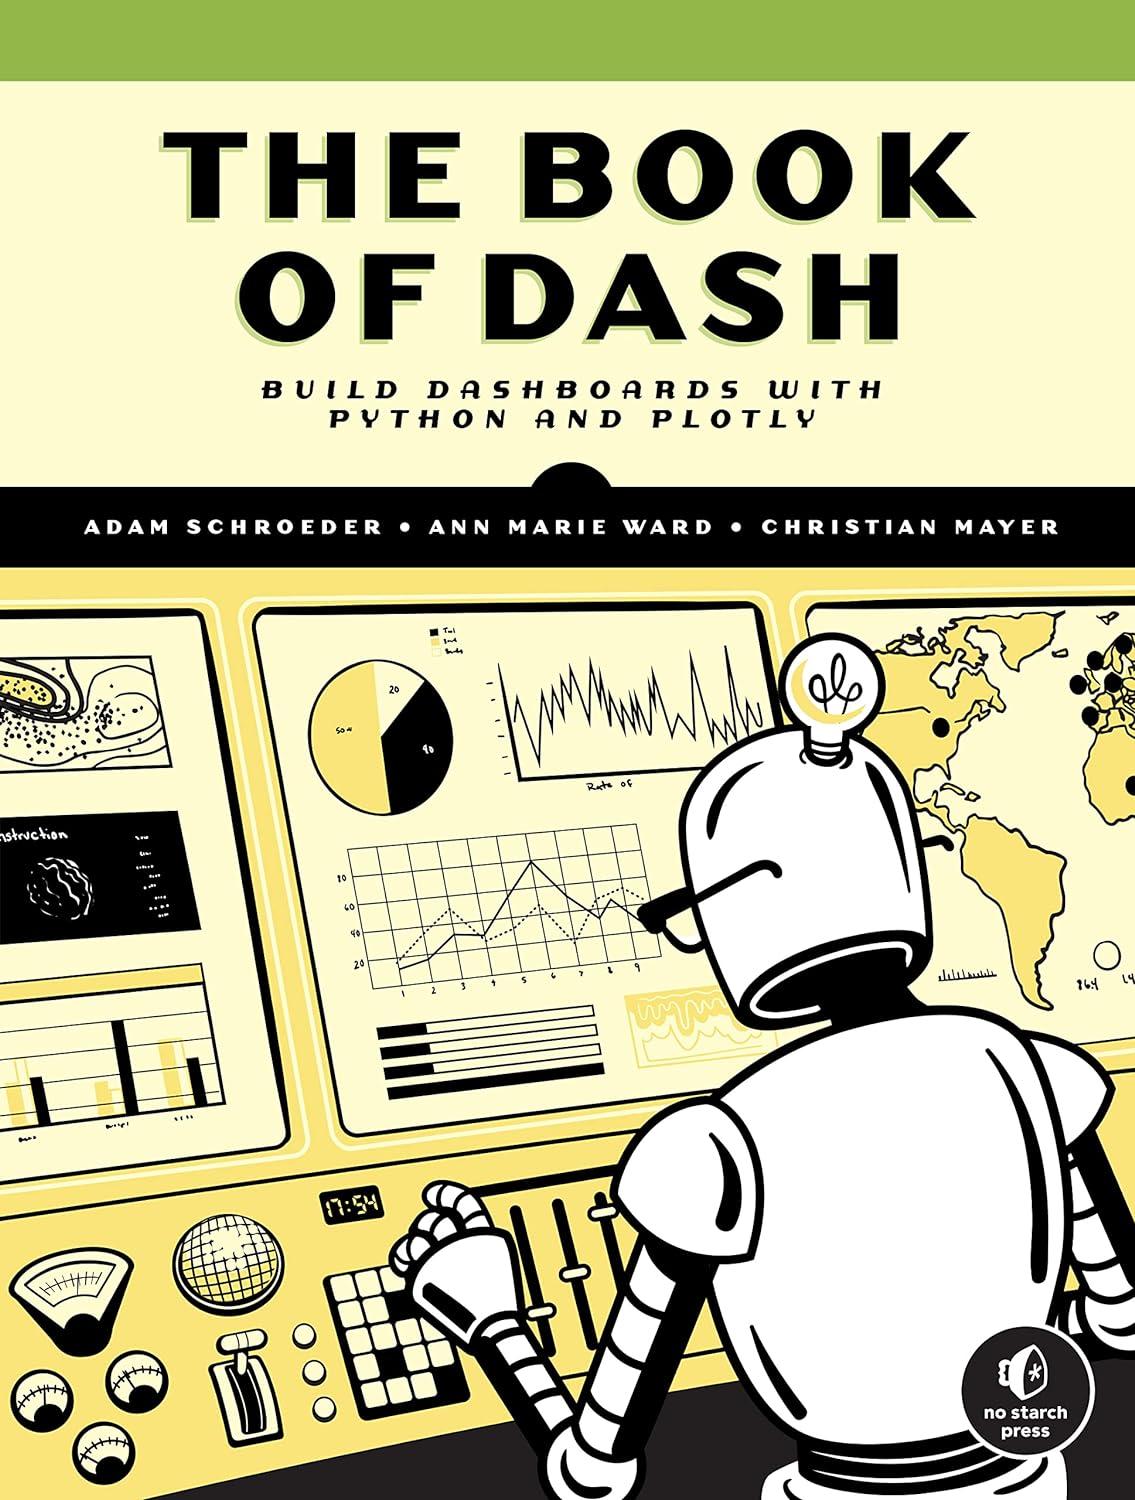 the book of dash build dashboards with python and plotly 1st edition adam schroeder, christian mayer, ann